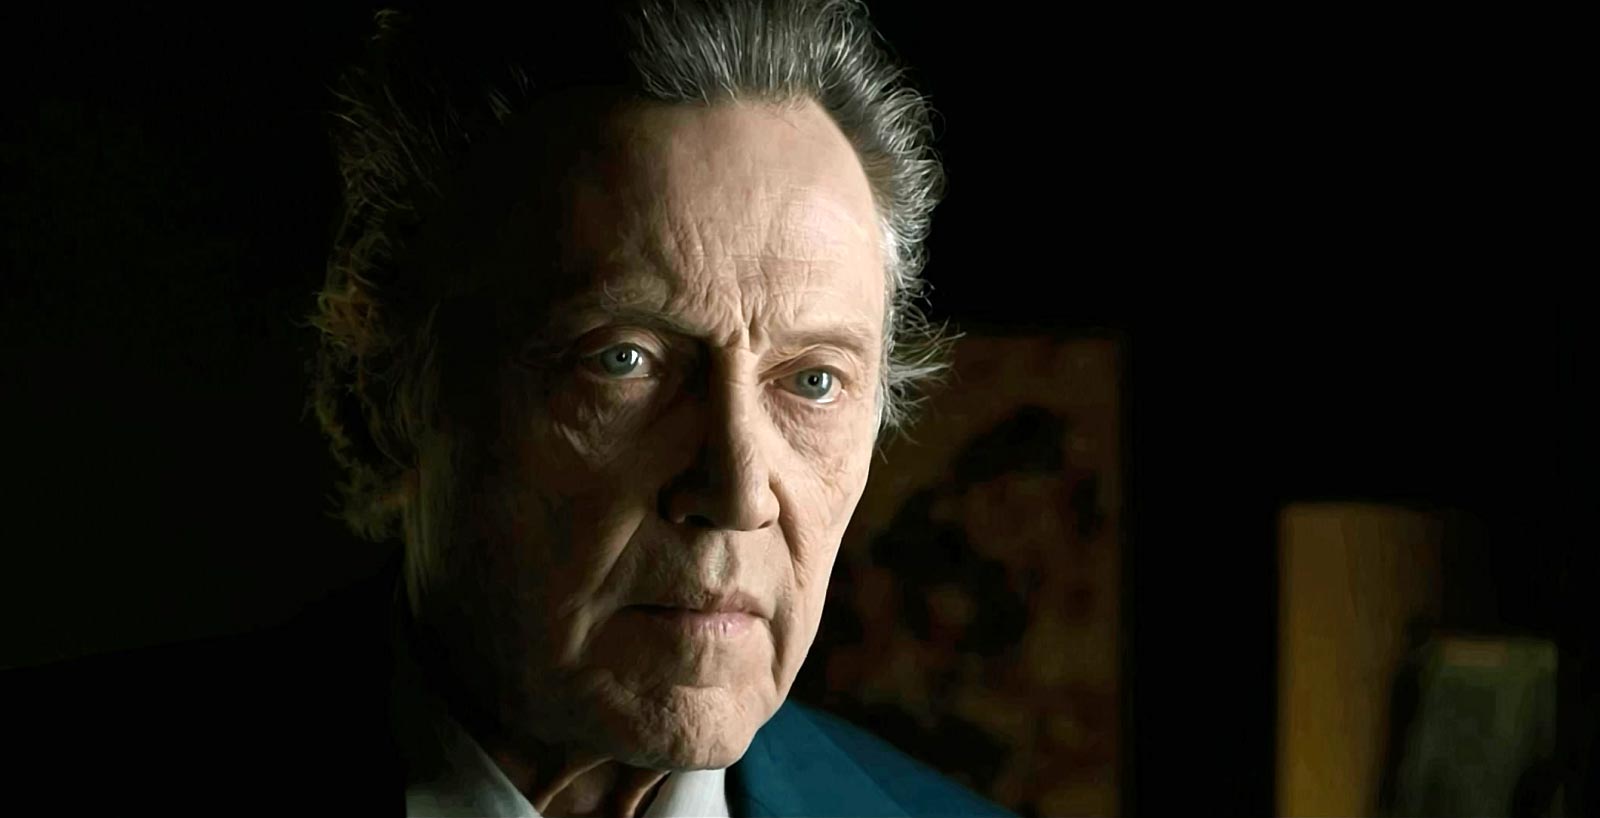 Dune Part 2: Christopher Walken would join the sequel to bring Padishah Emperor Shaddam IV to life